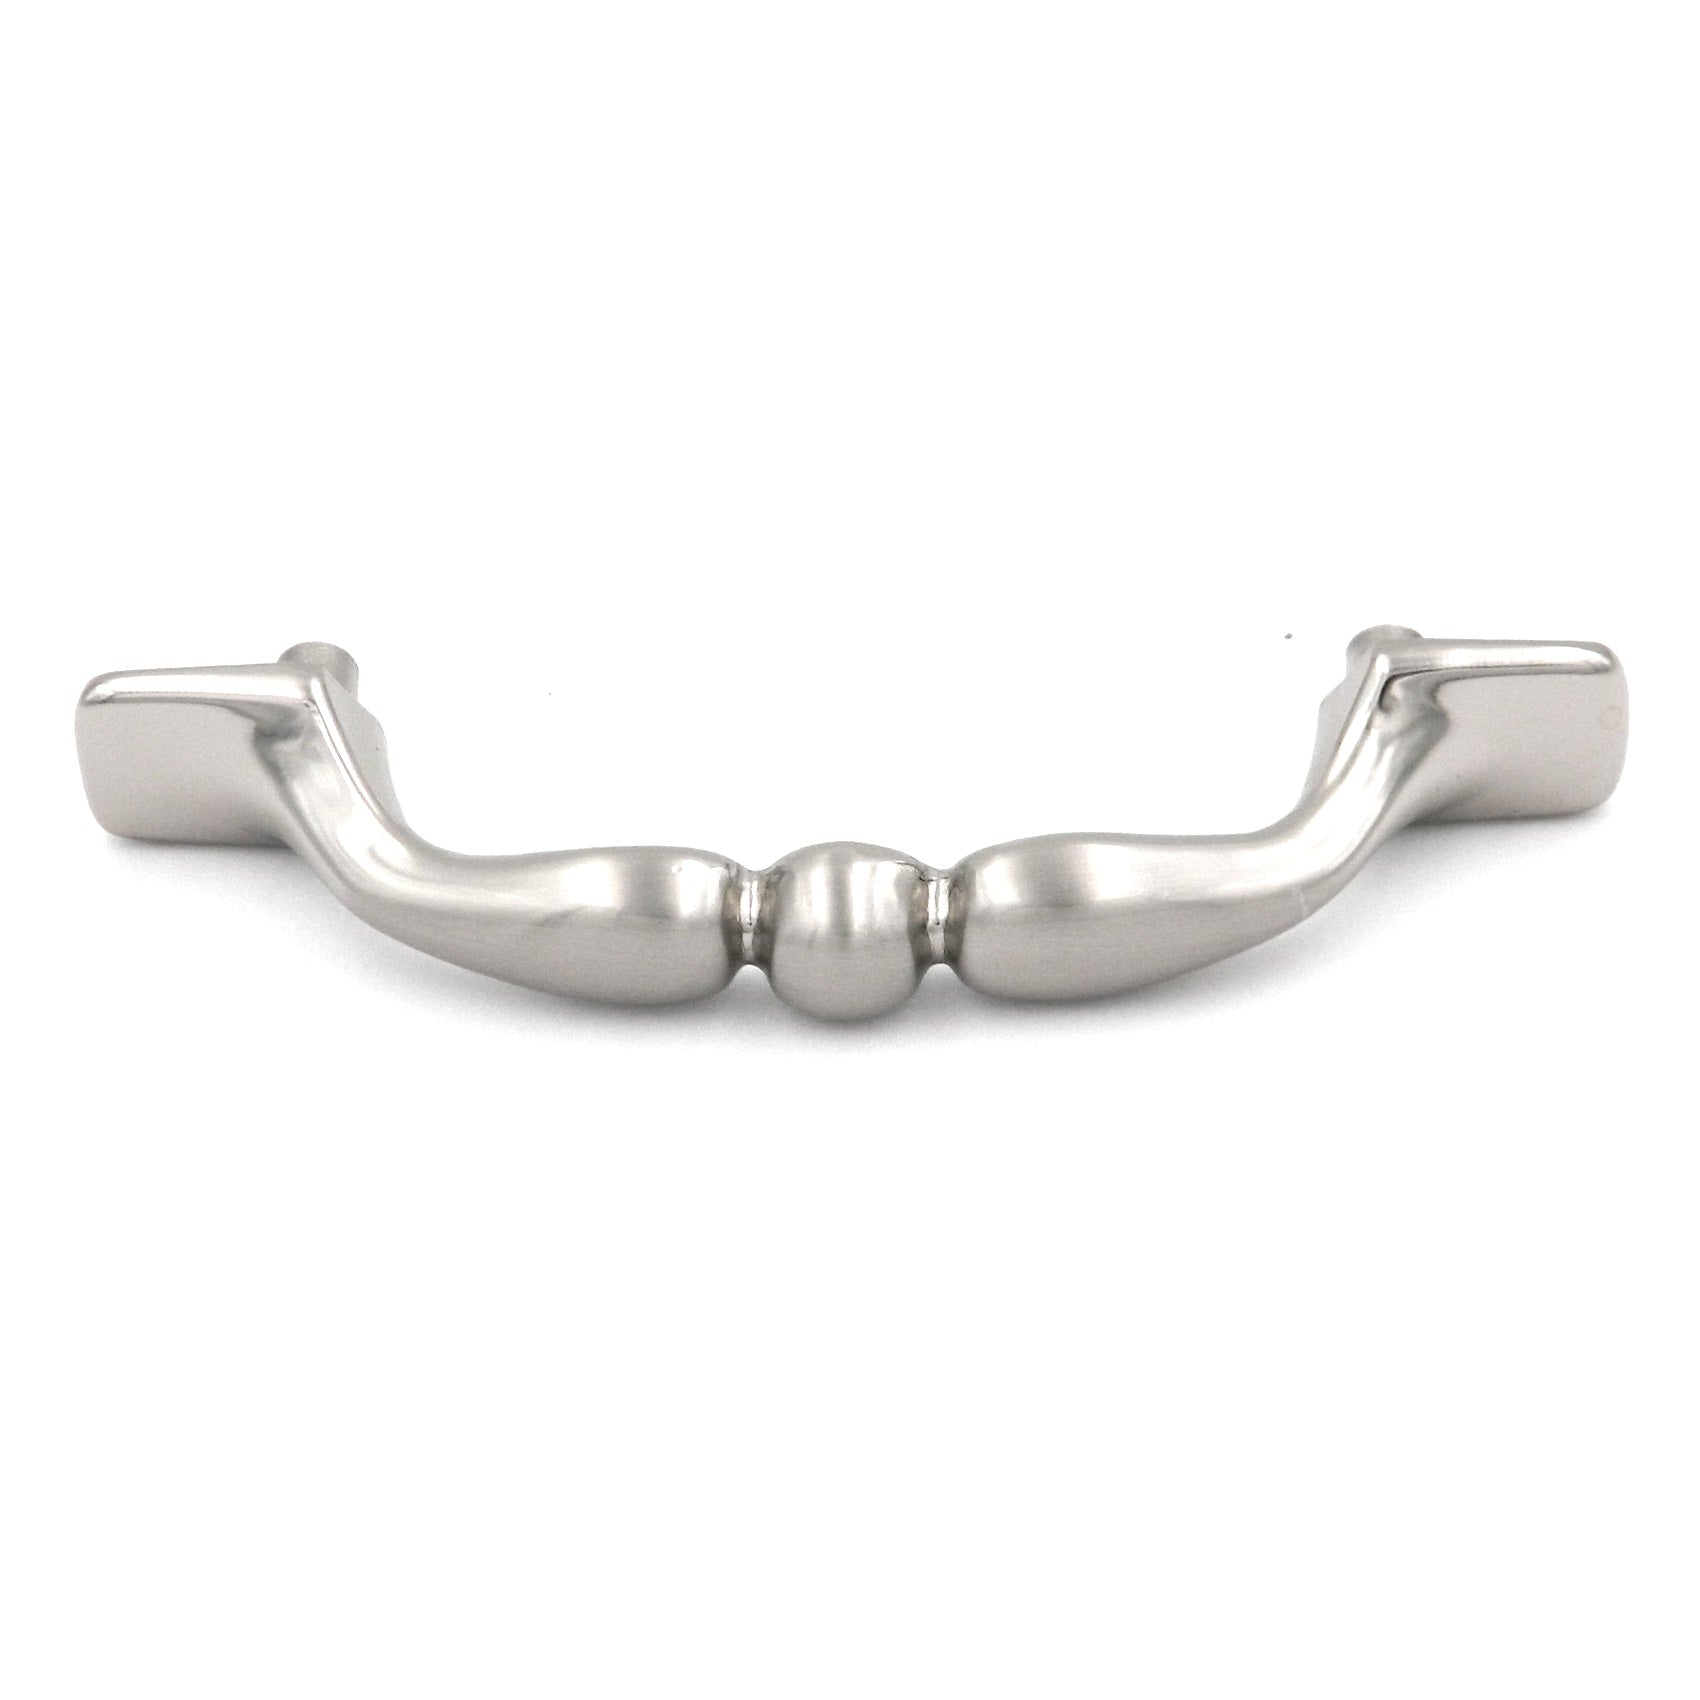 10 Pack Hickory Tranquility P524-SC Satin Chrome White 3"cc Arch Cabinet Handle Pull